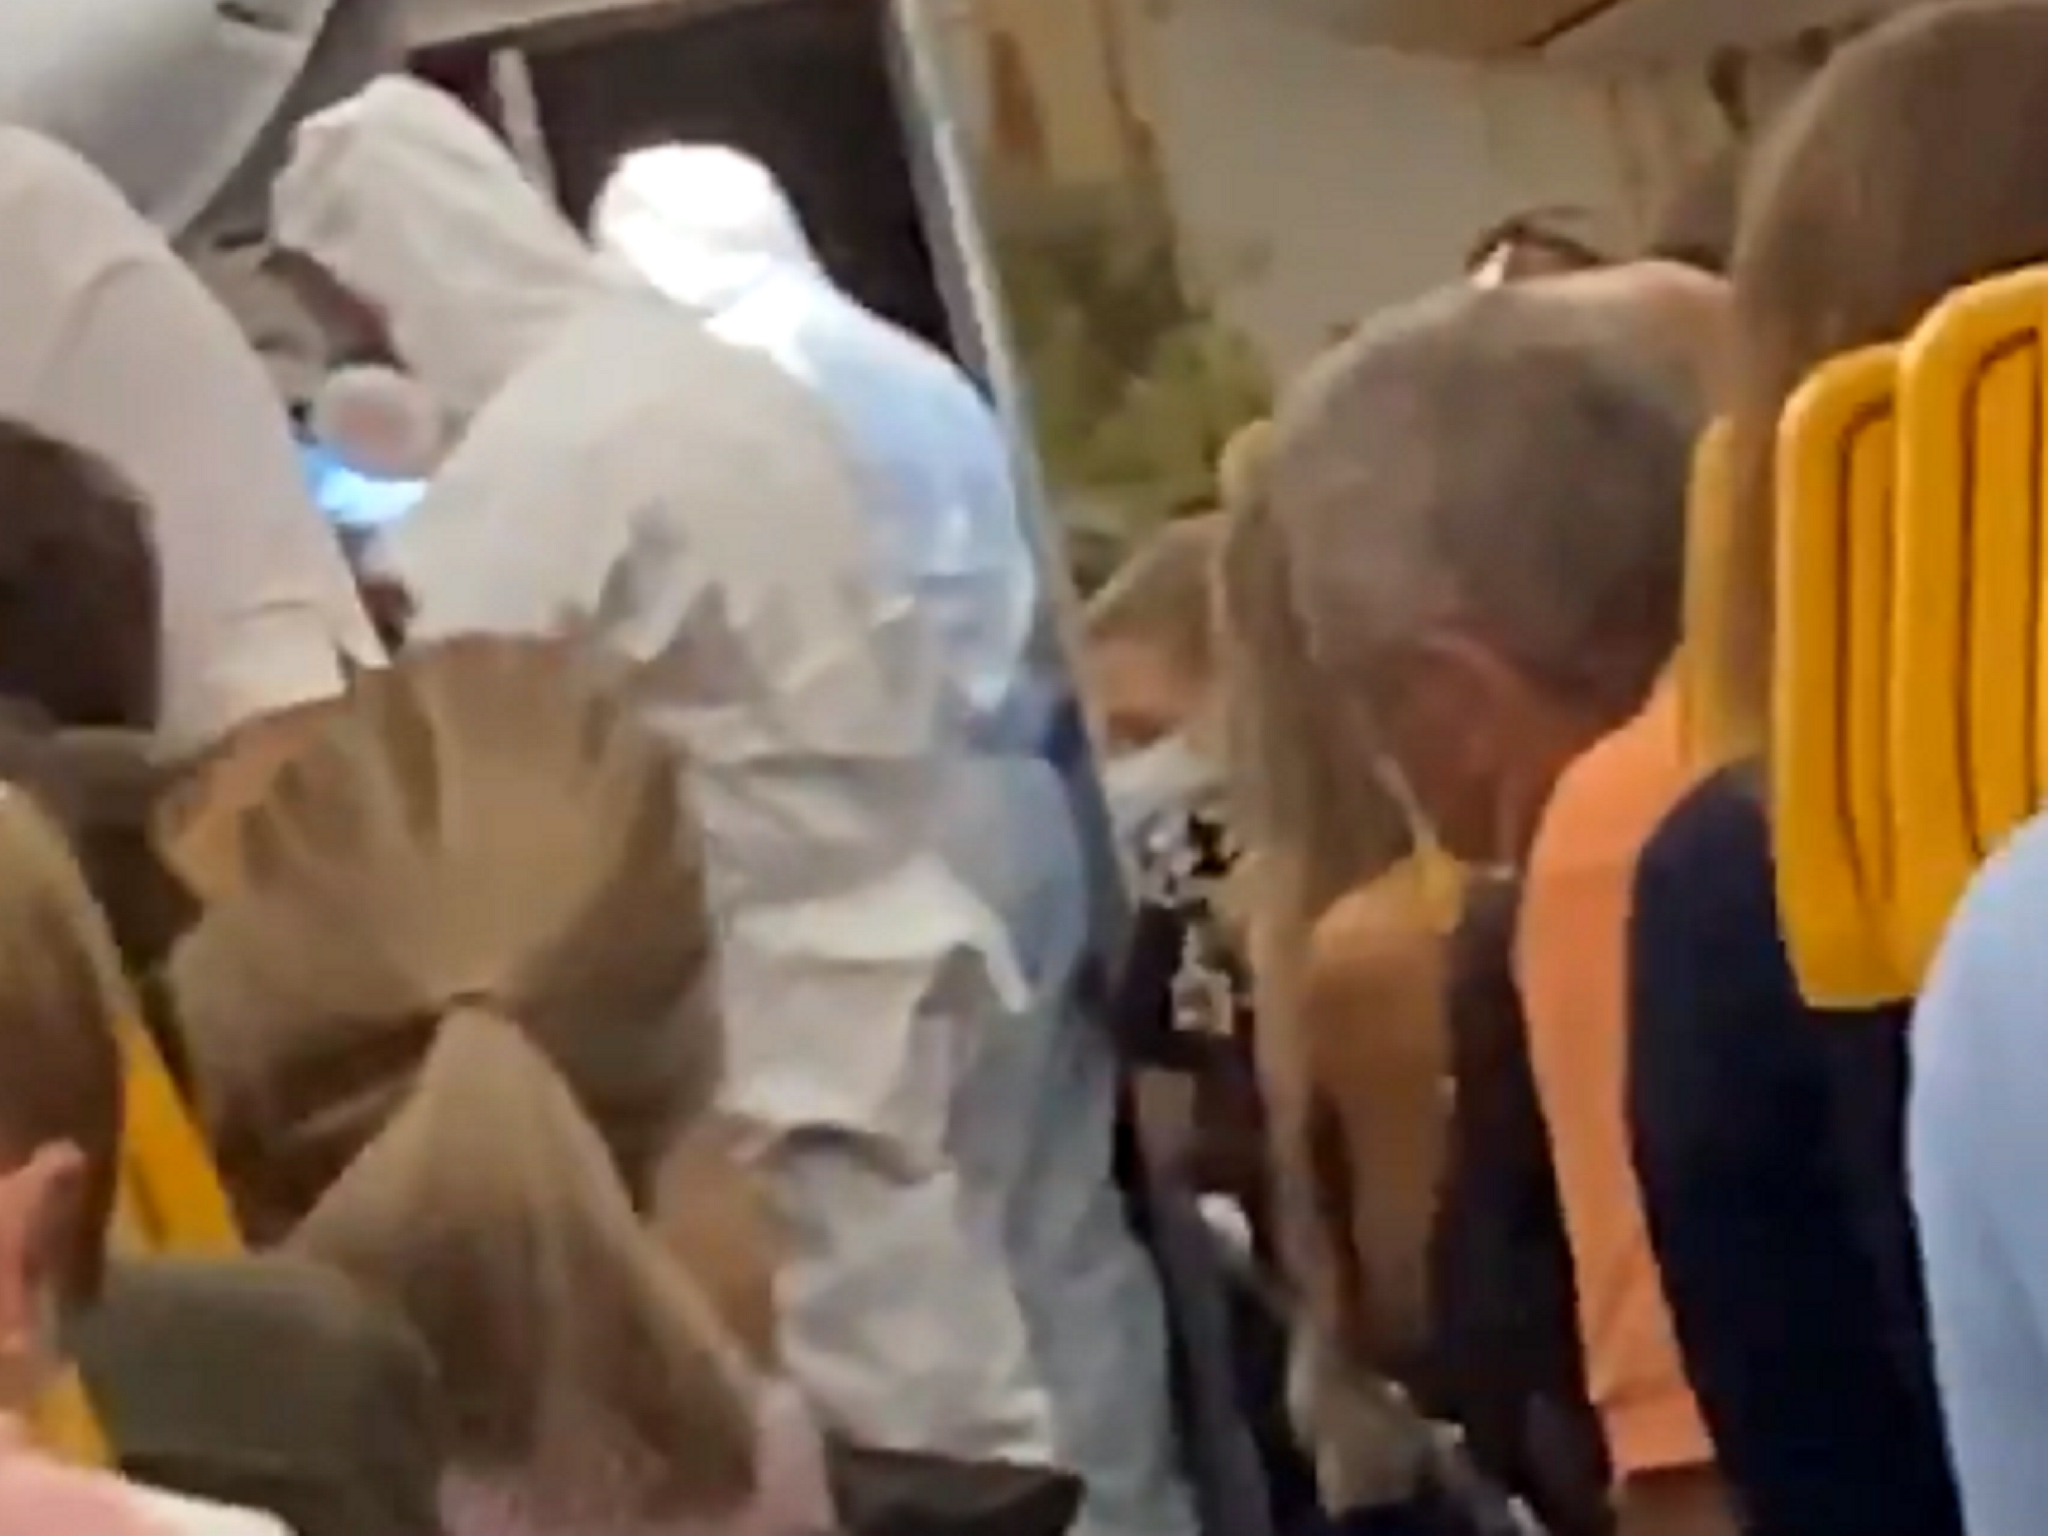 Still image taken from video posted on Twitter by @FionnMurphy10 of officials in hazmat suits removing two passengers from a Ryanair flight at Stansted Airport after one of them tested positive for coronavirus.